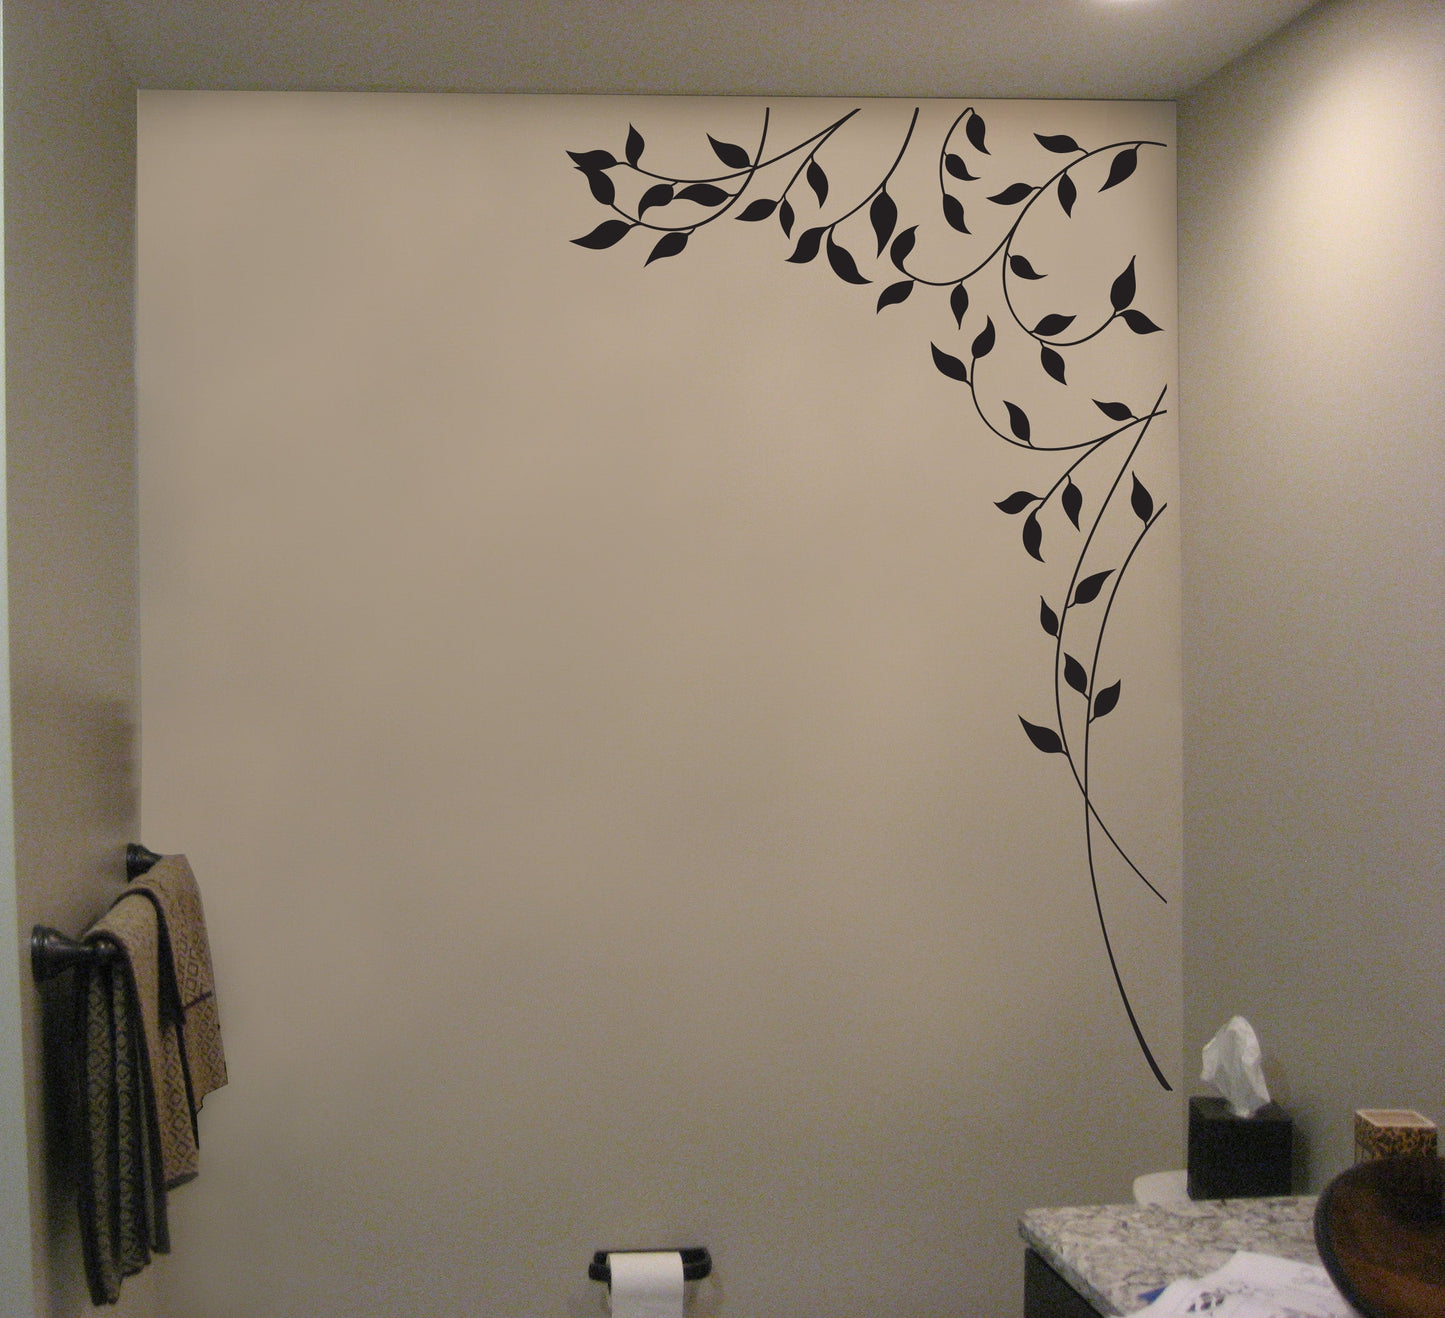 Vines, Branch and Leafs Wall Decal Sticker. Nature Theme Wall Decor. #743